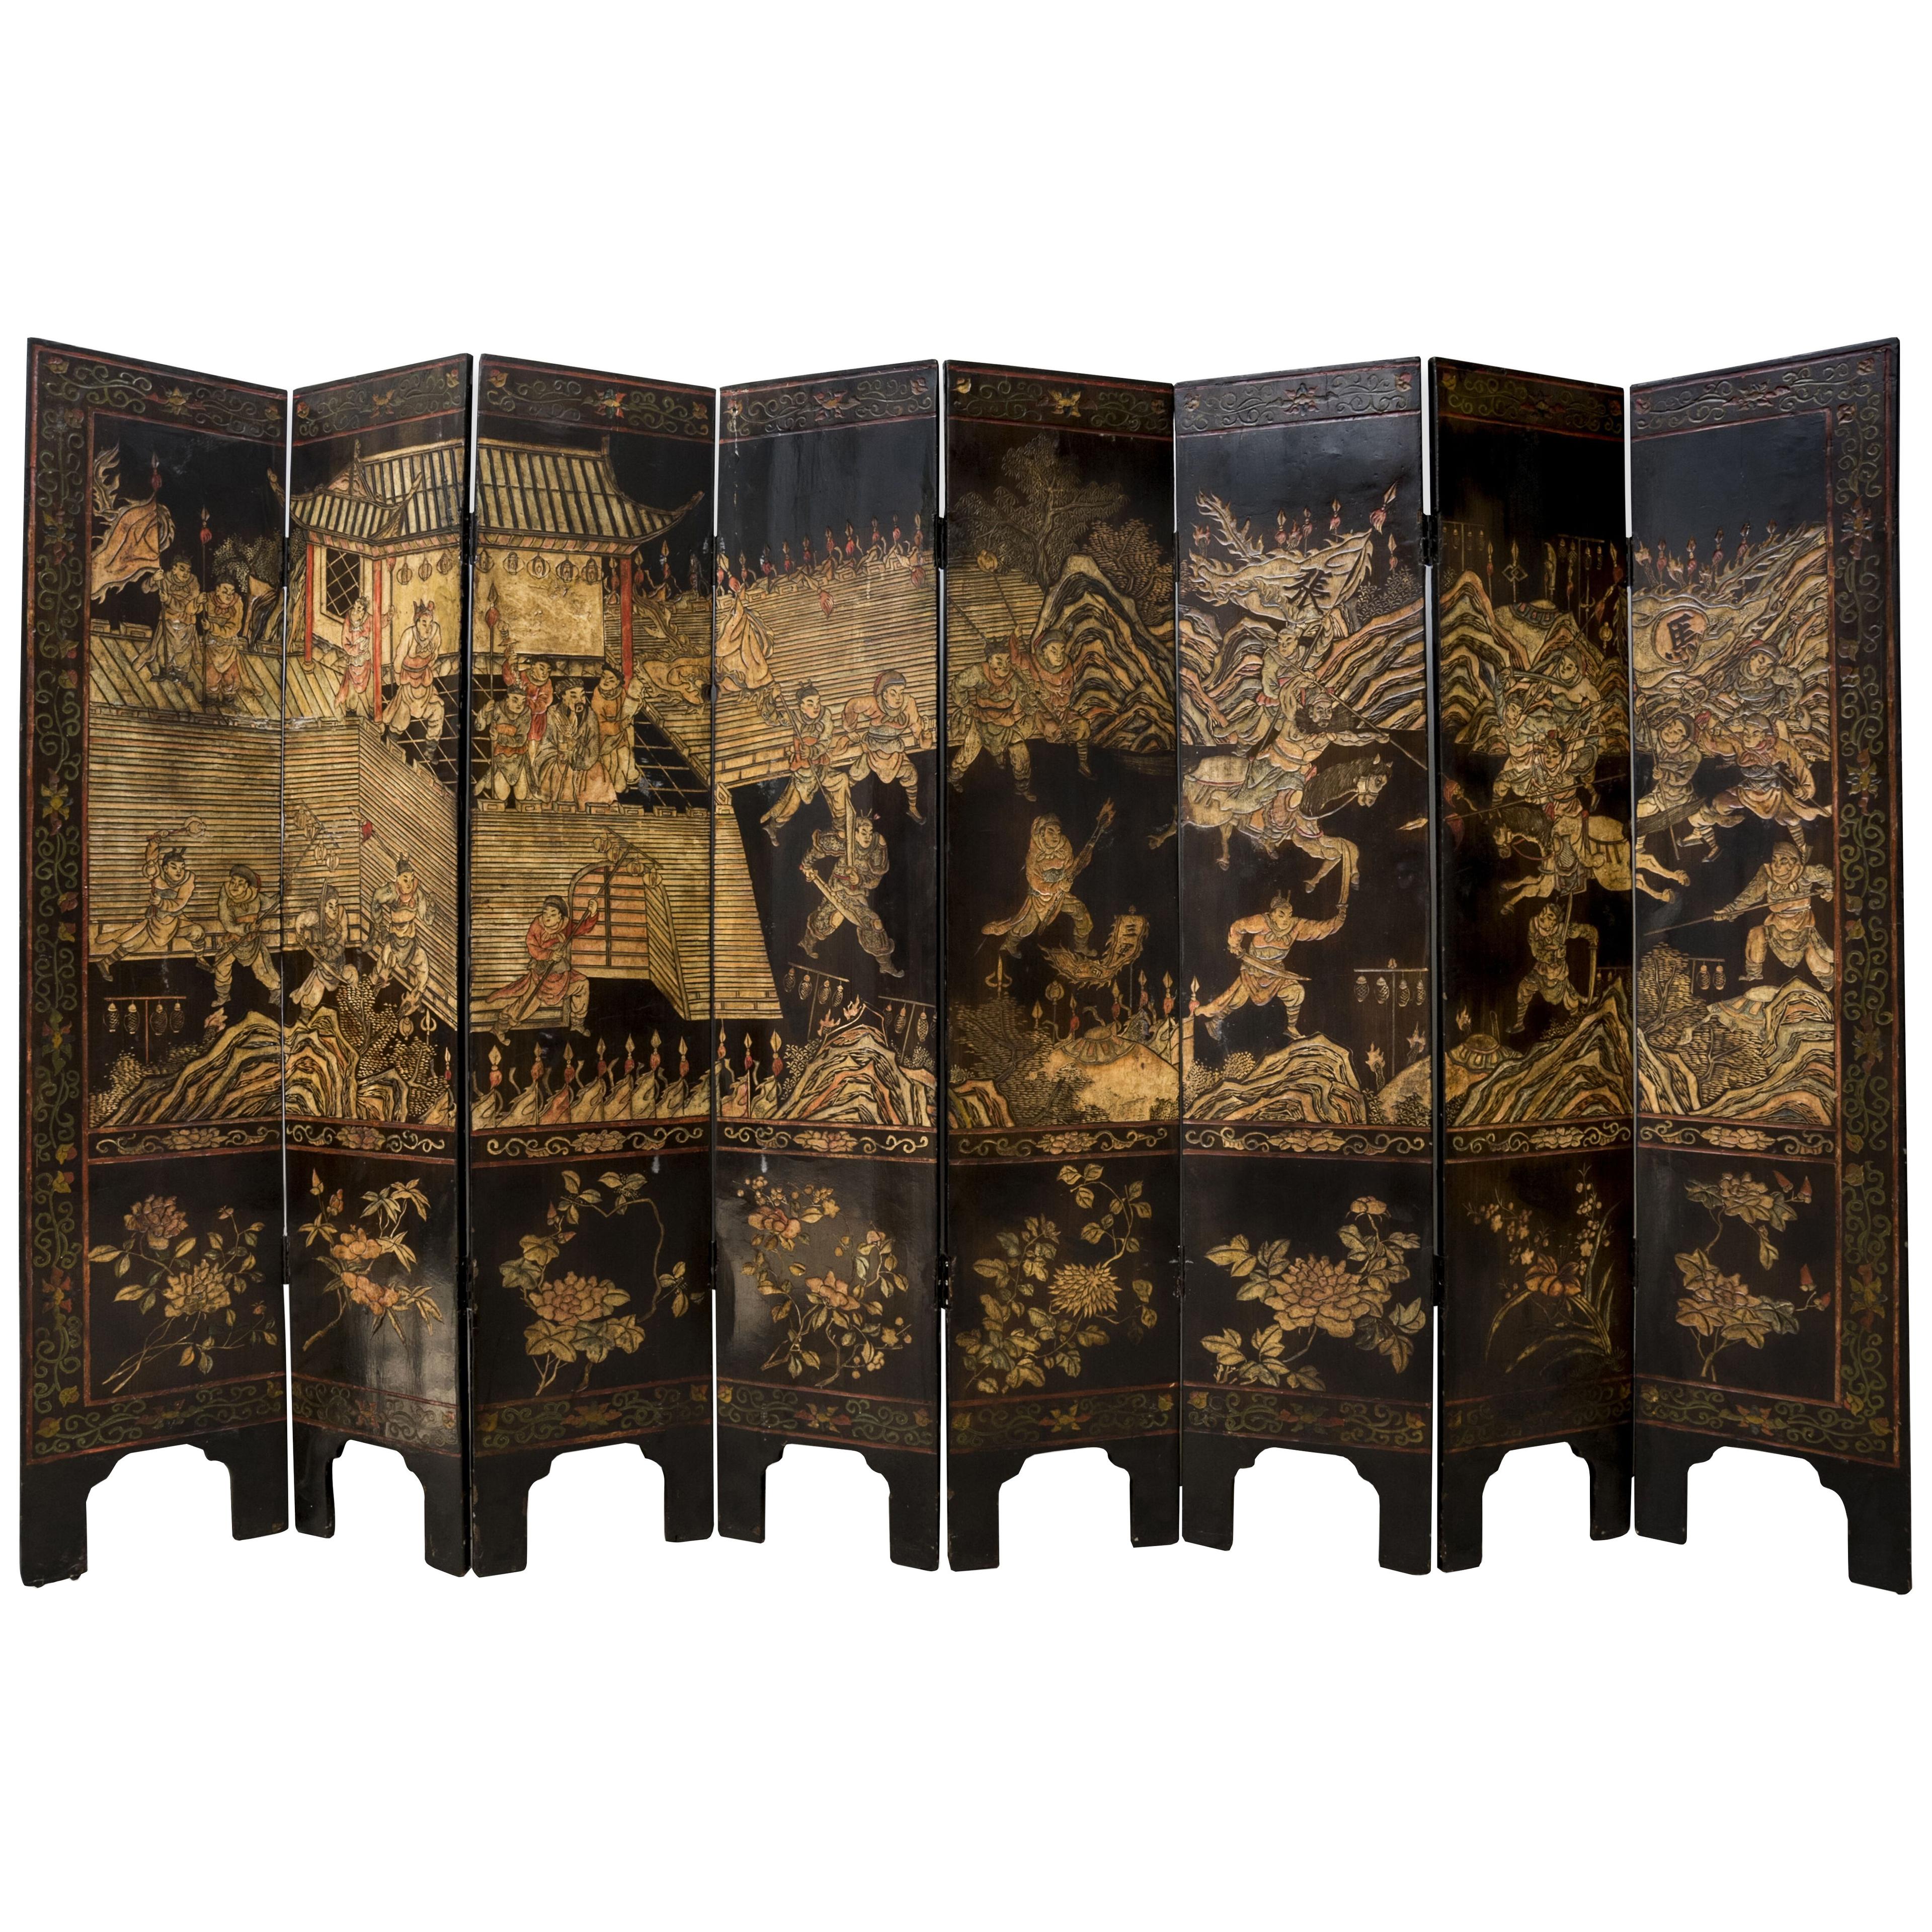 Chinese eight-panels Coromandel screen with battle scene, birds and foliage